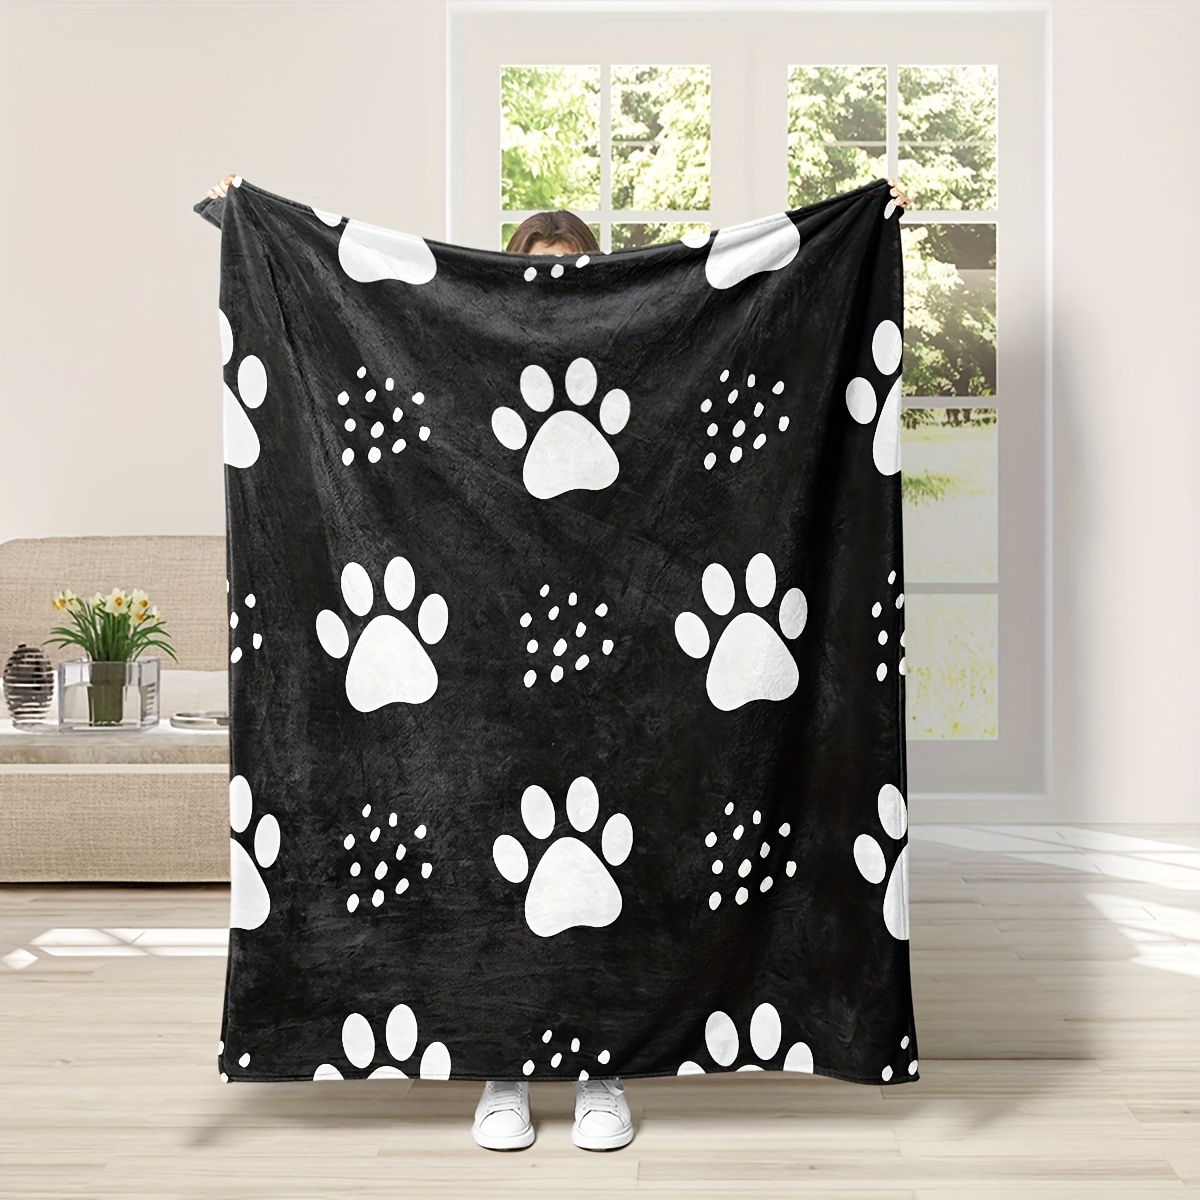 

1pc Dog Paw Print Flannel Blanket, Soft Cozy Throw Blanket Nap Blanket For Travel Sofa Bed Office Home Decor, Birthday Holiday Gift Blanket For Boys Girls, Available All Season